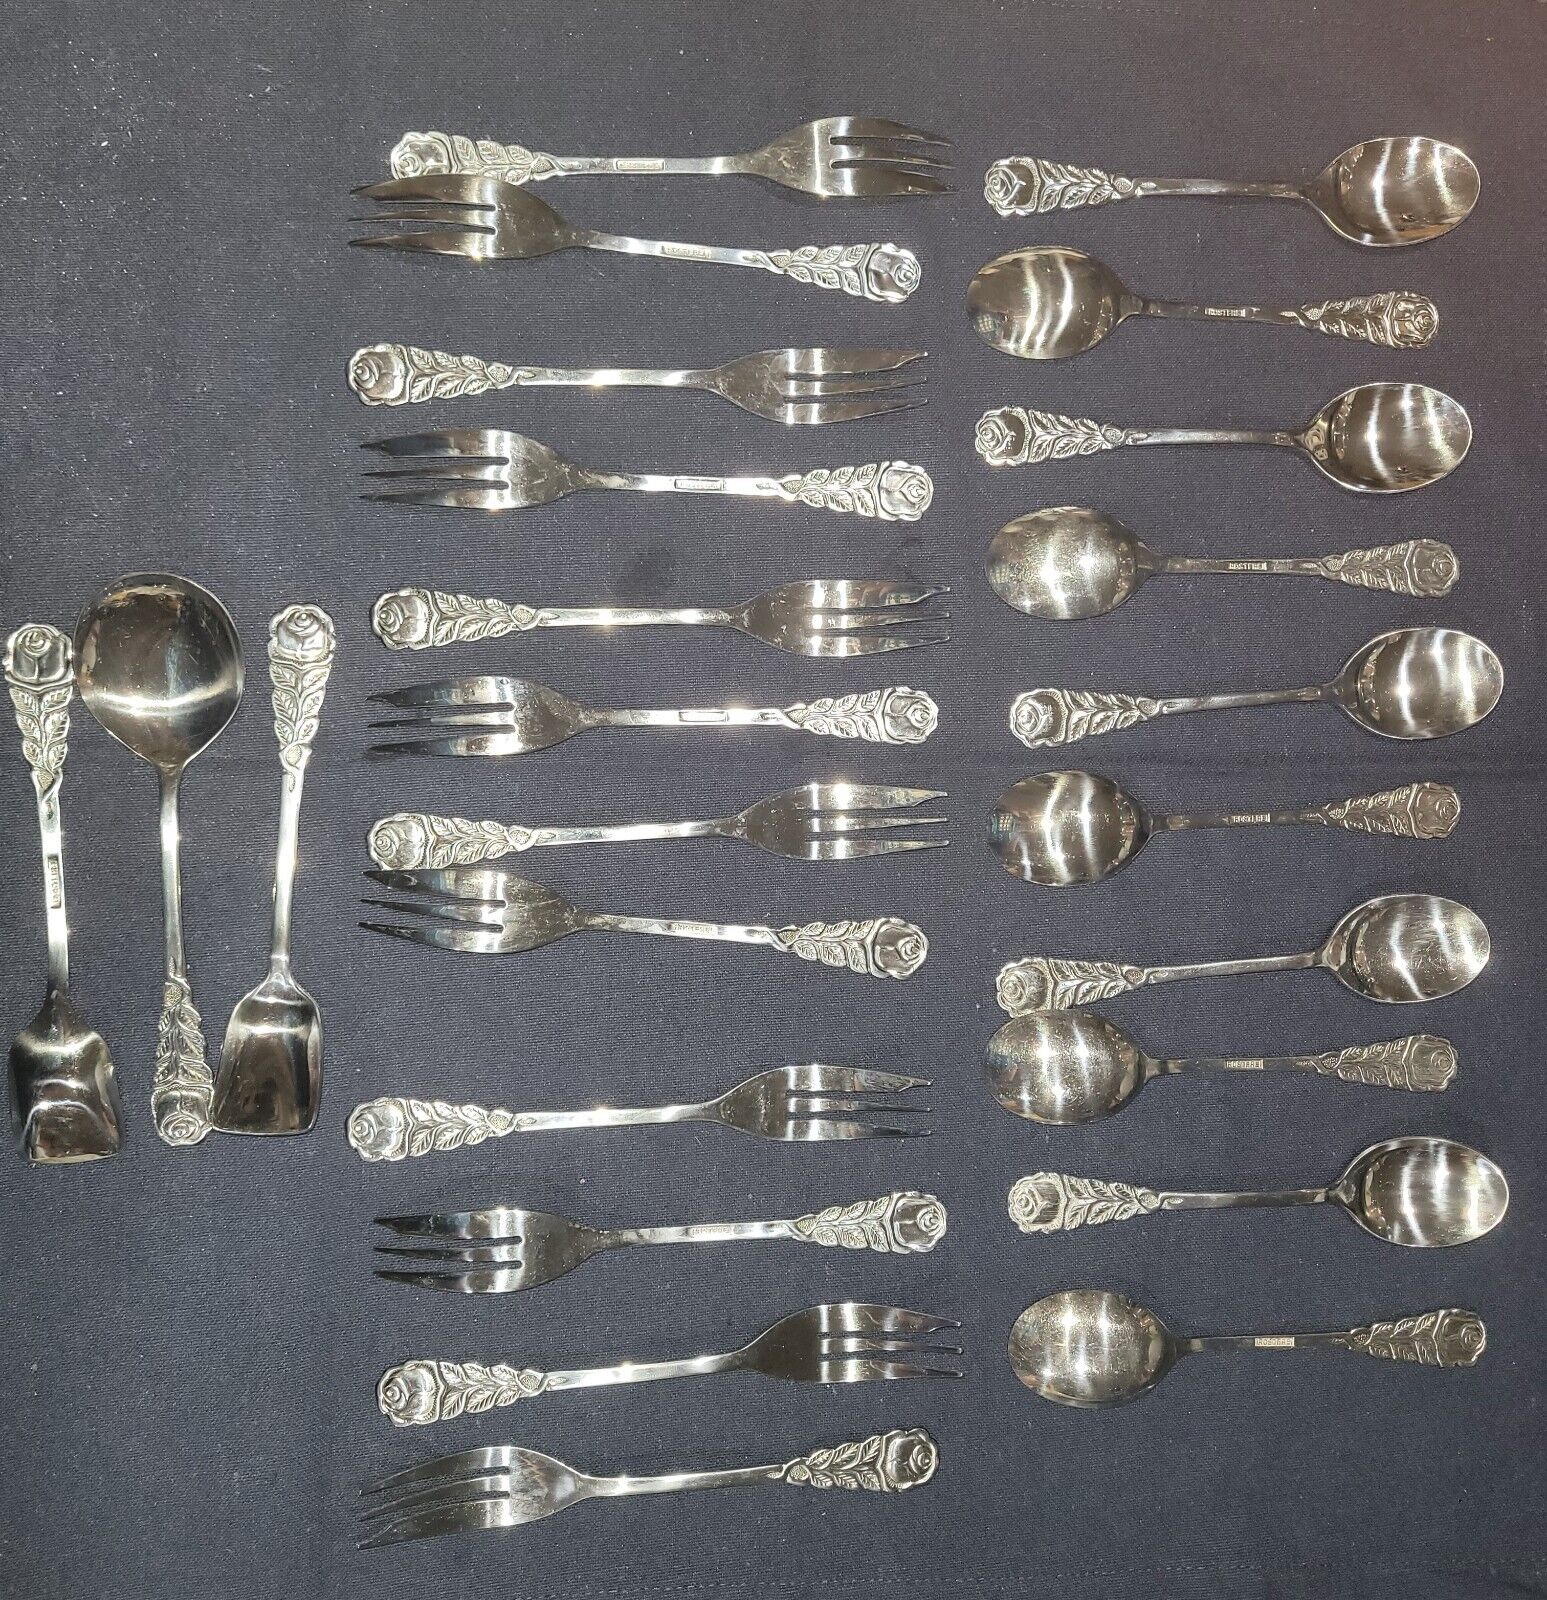 Antique Rostfrei Solingen Germany Coffee and Dessert Cutlery Set 27 Pieces 